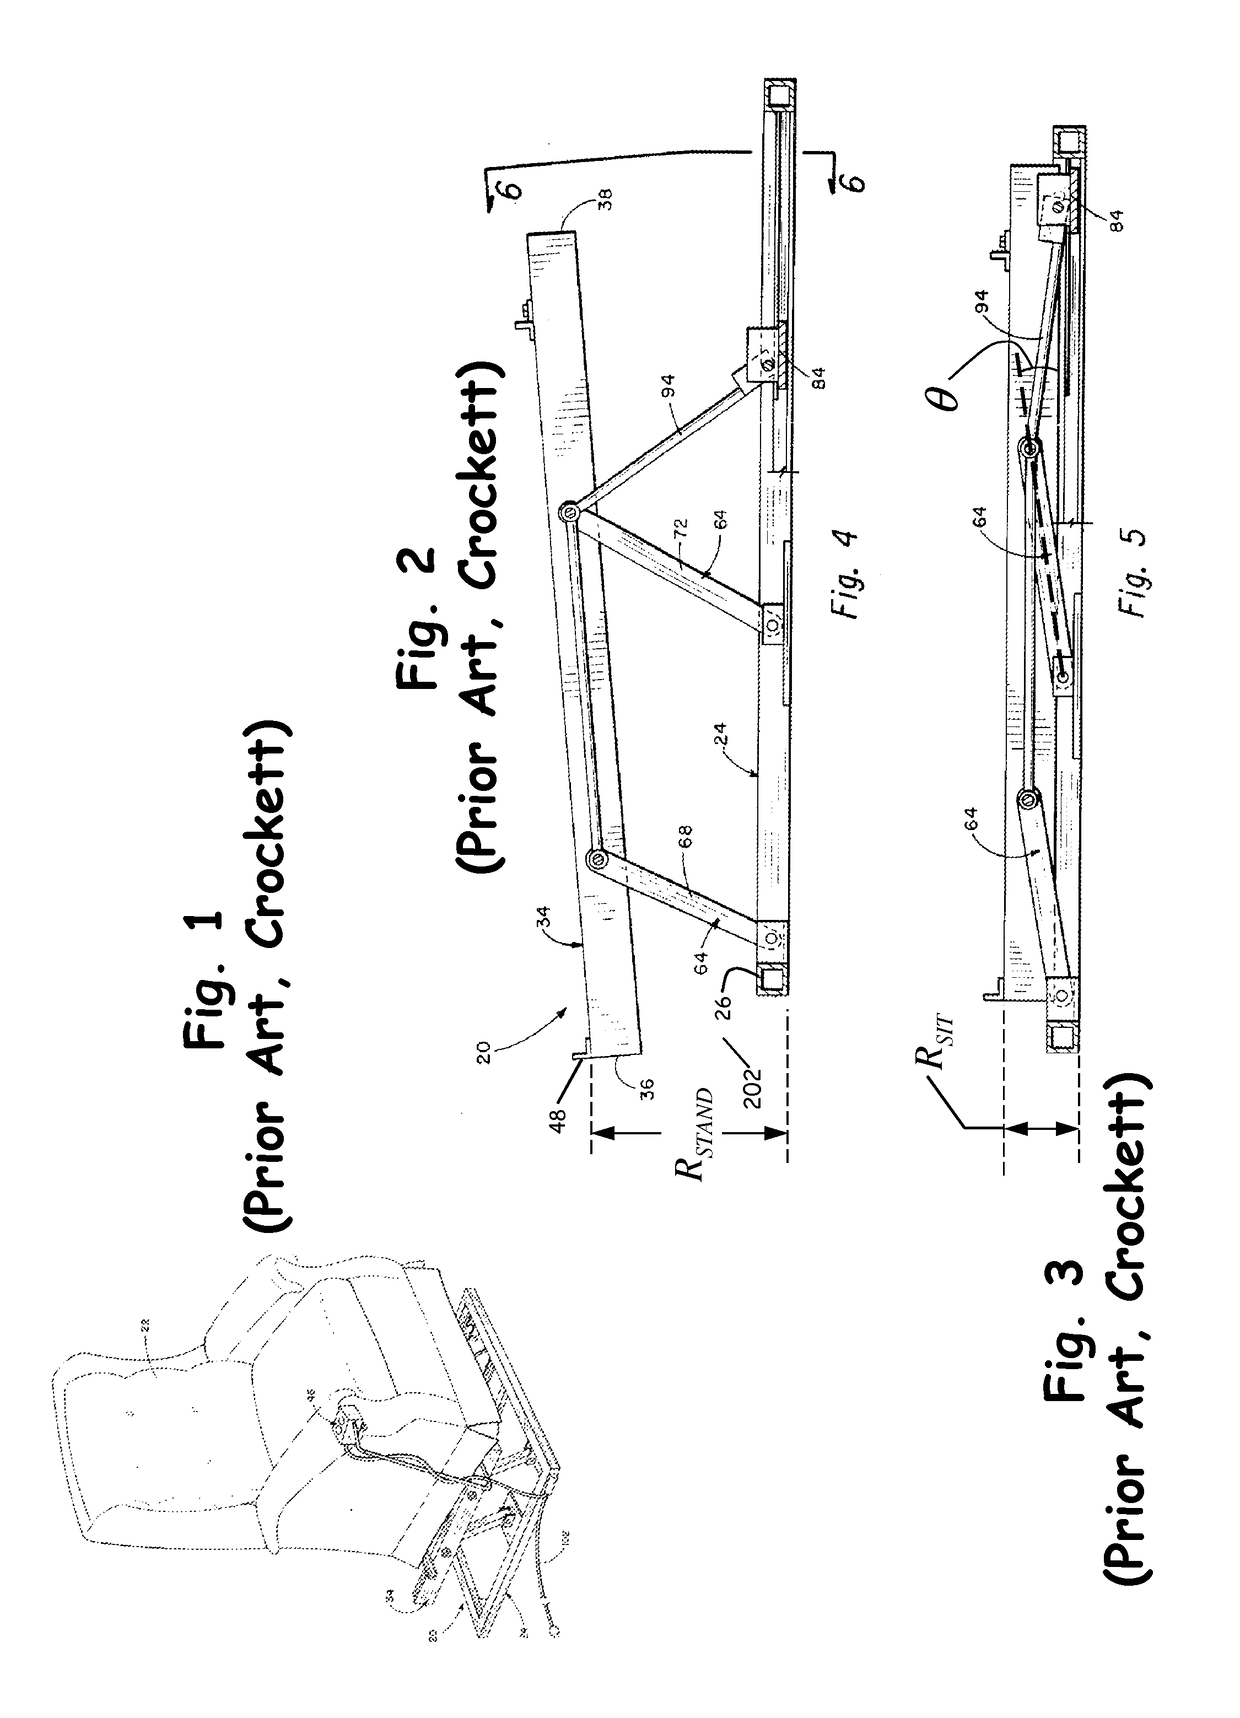 Apparatus for lifting a chair